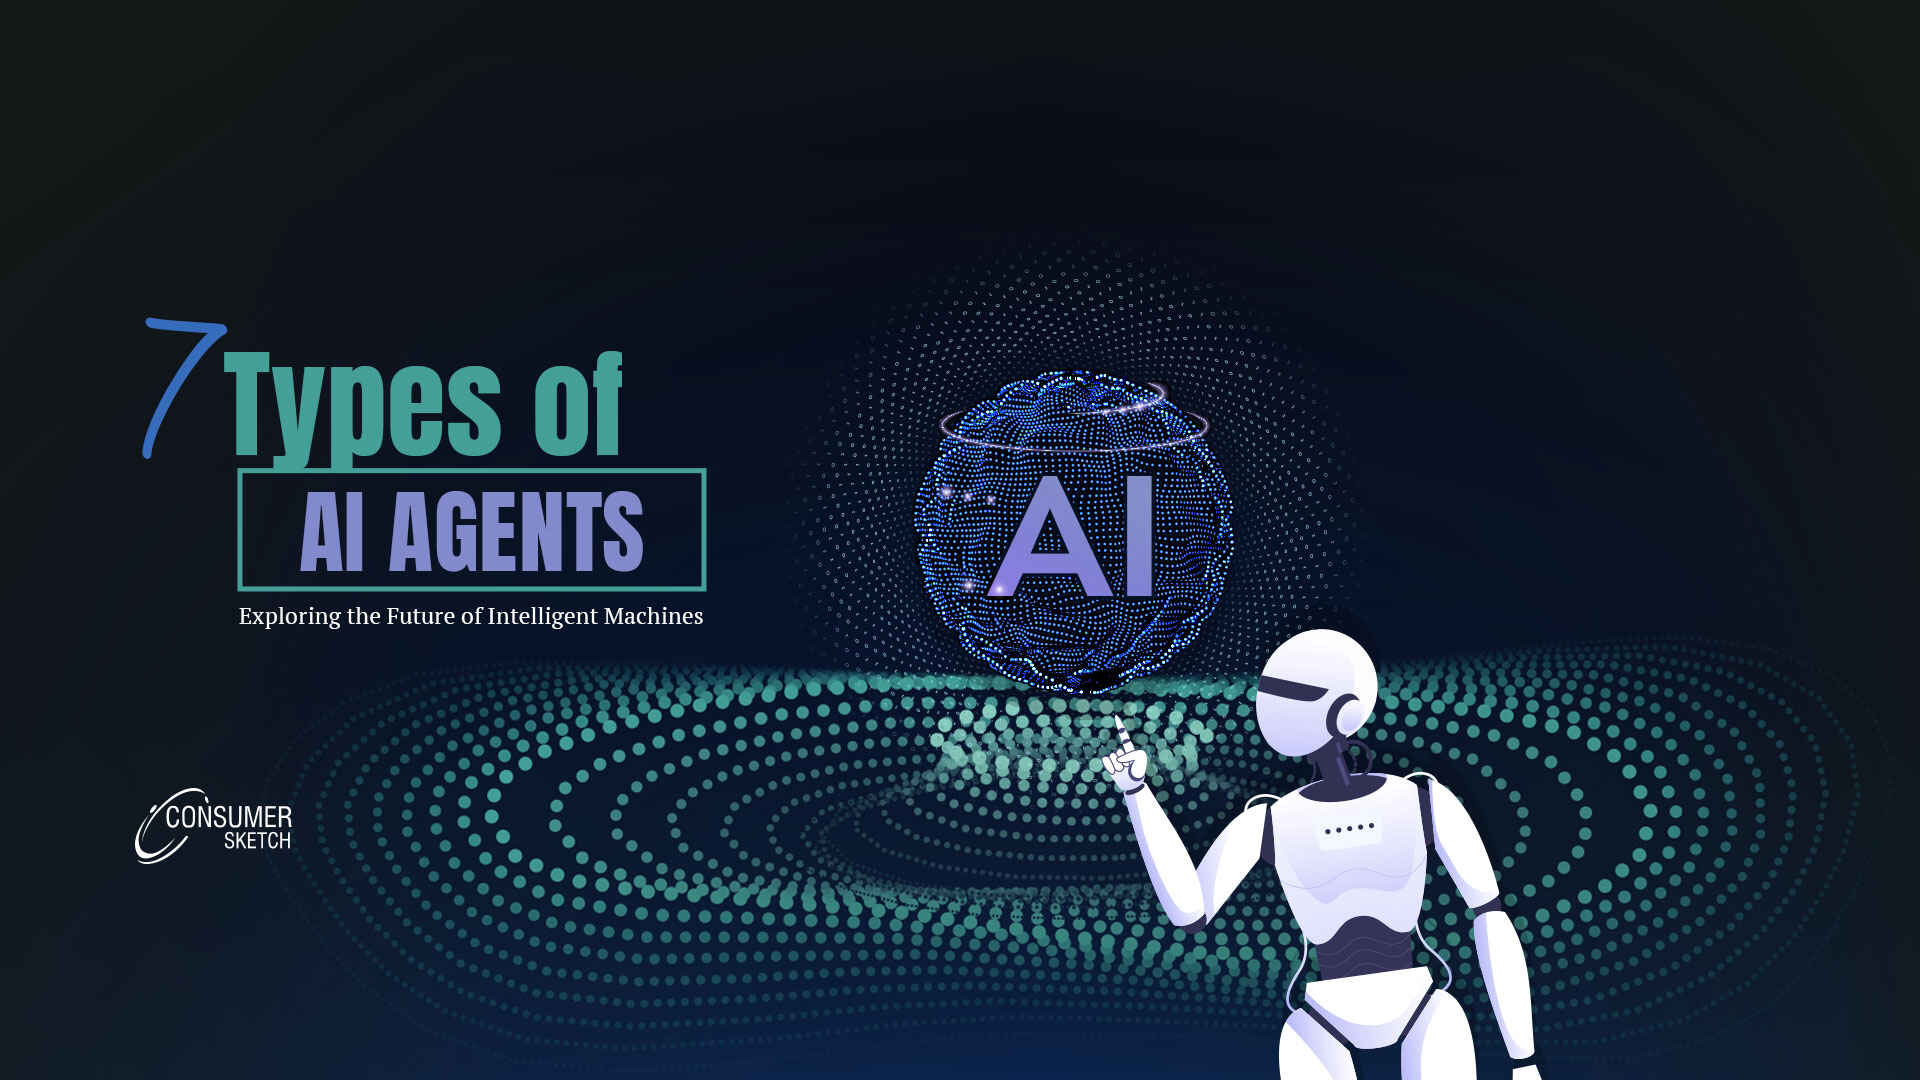 7 Types of AI Agents: Exploring the Future of Intelligent Machines